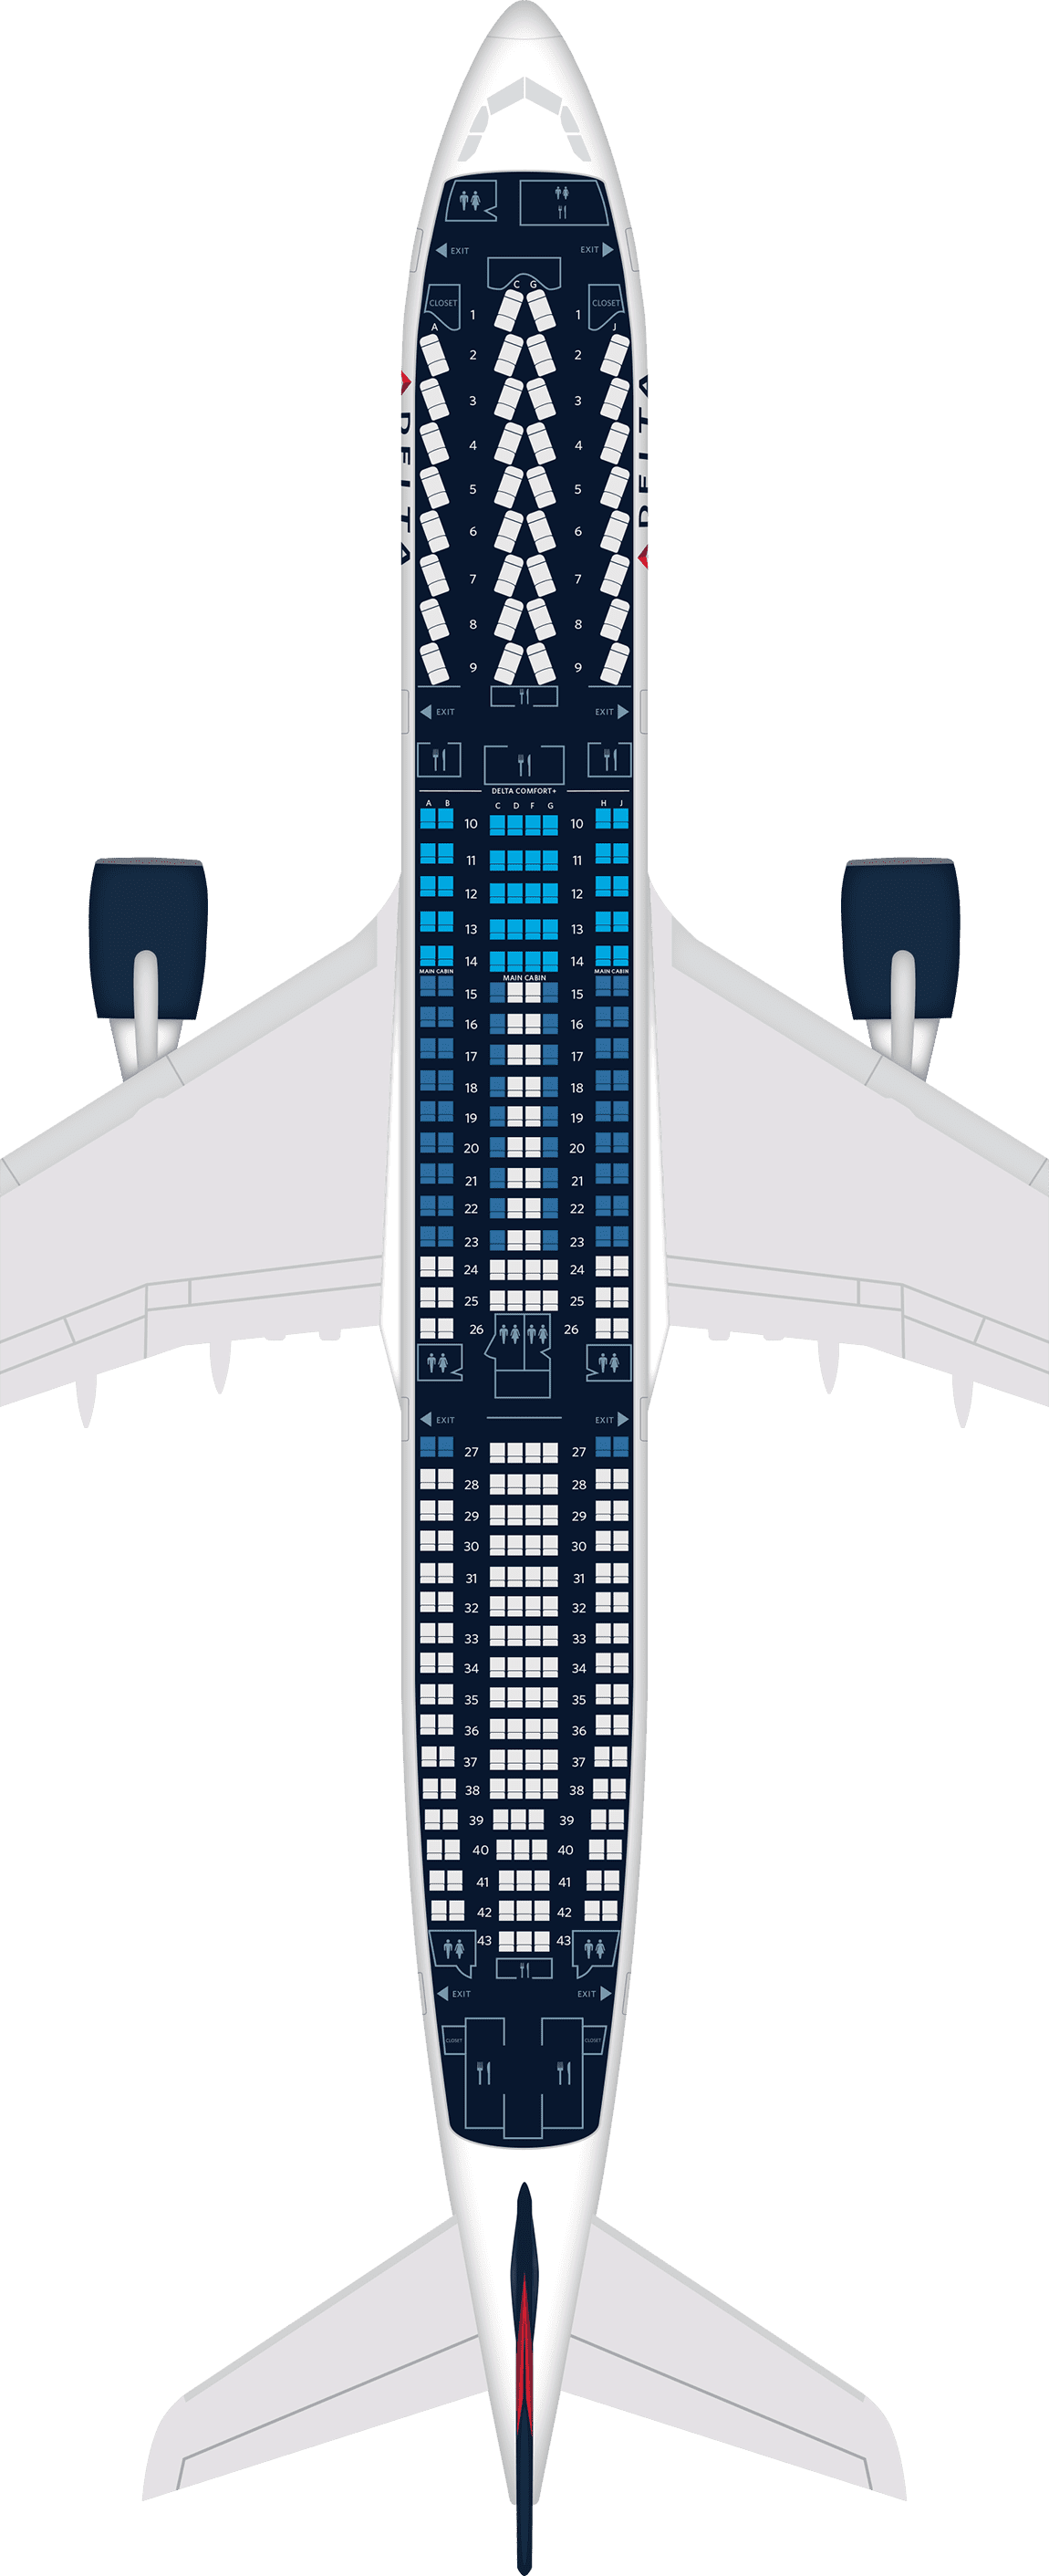 Airbus A330-300 Seat Maps, Specs & Amenities | Delta Air Lines